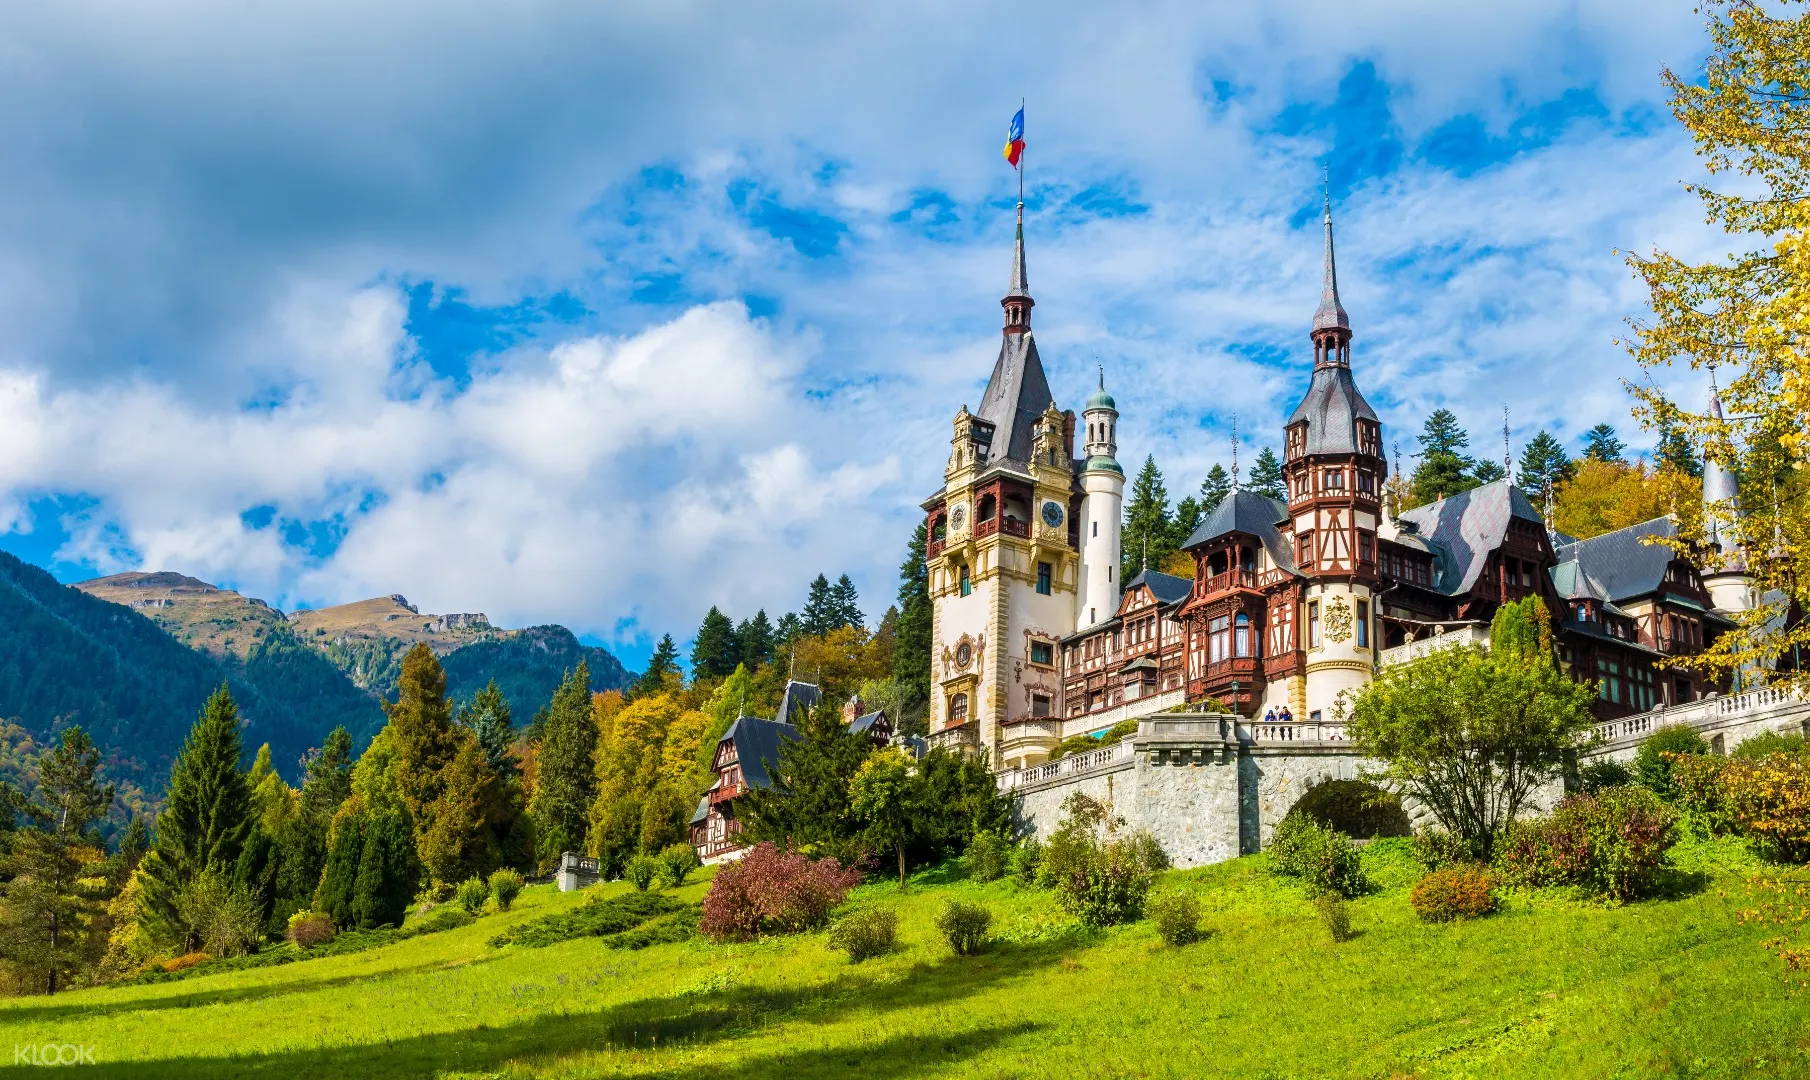 Dracula S Castle Day Tour With Round Trip Transfers From Bucharest Hotels Klook クルック